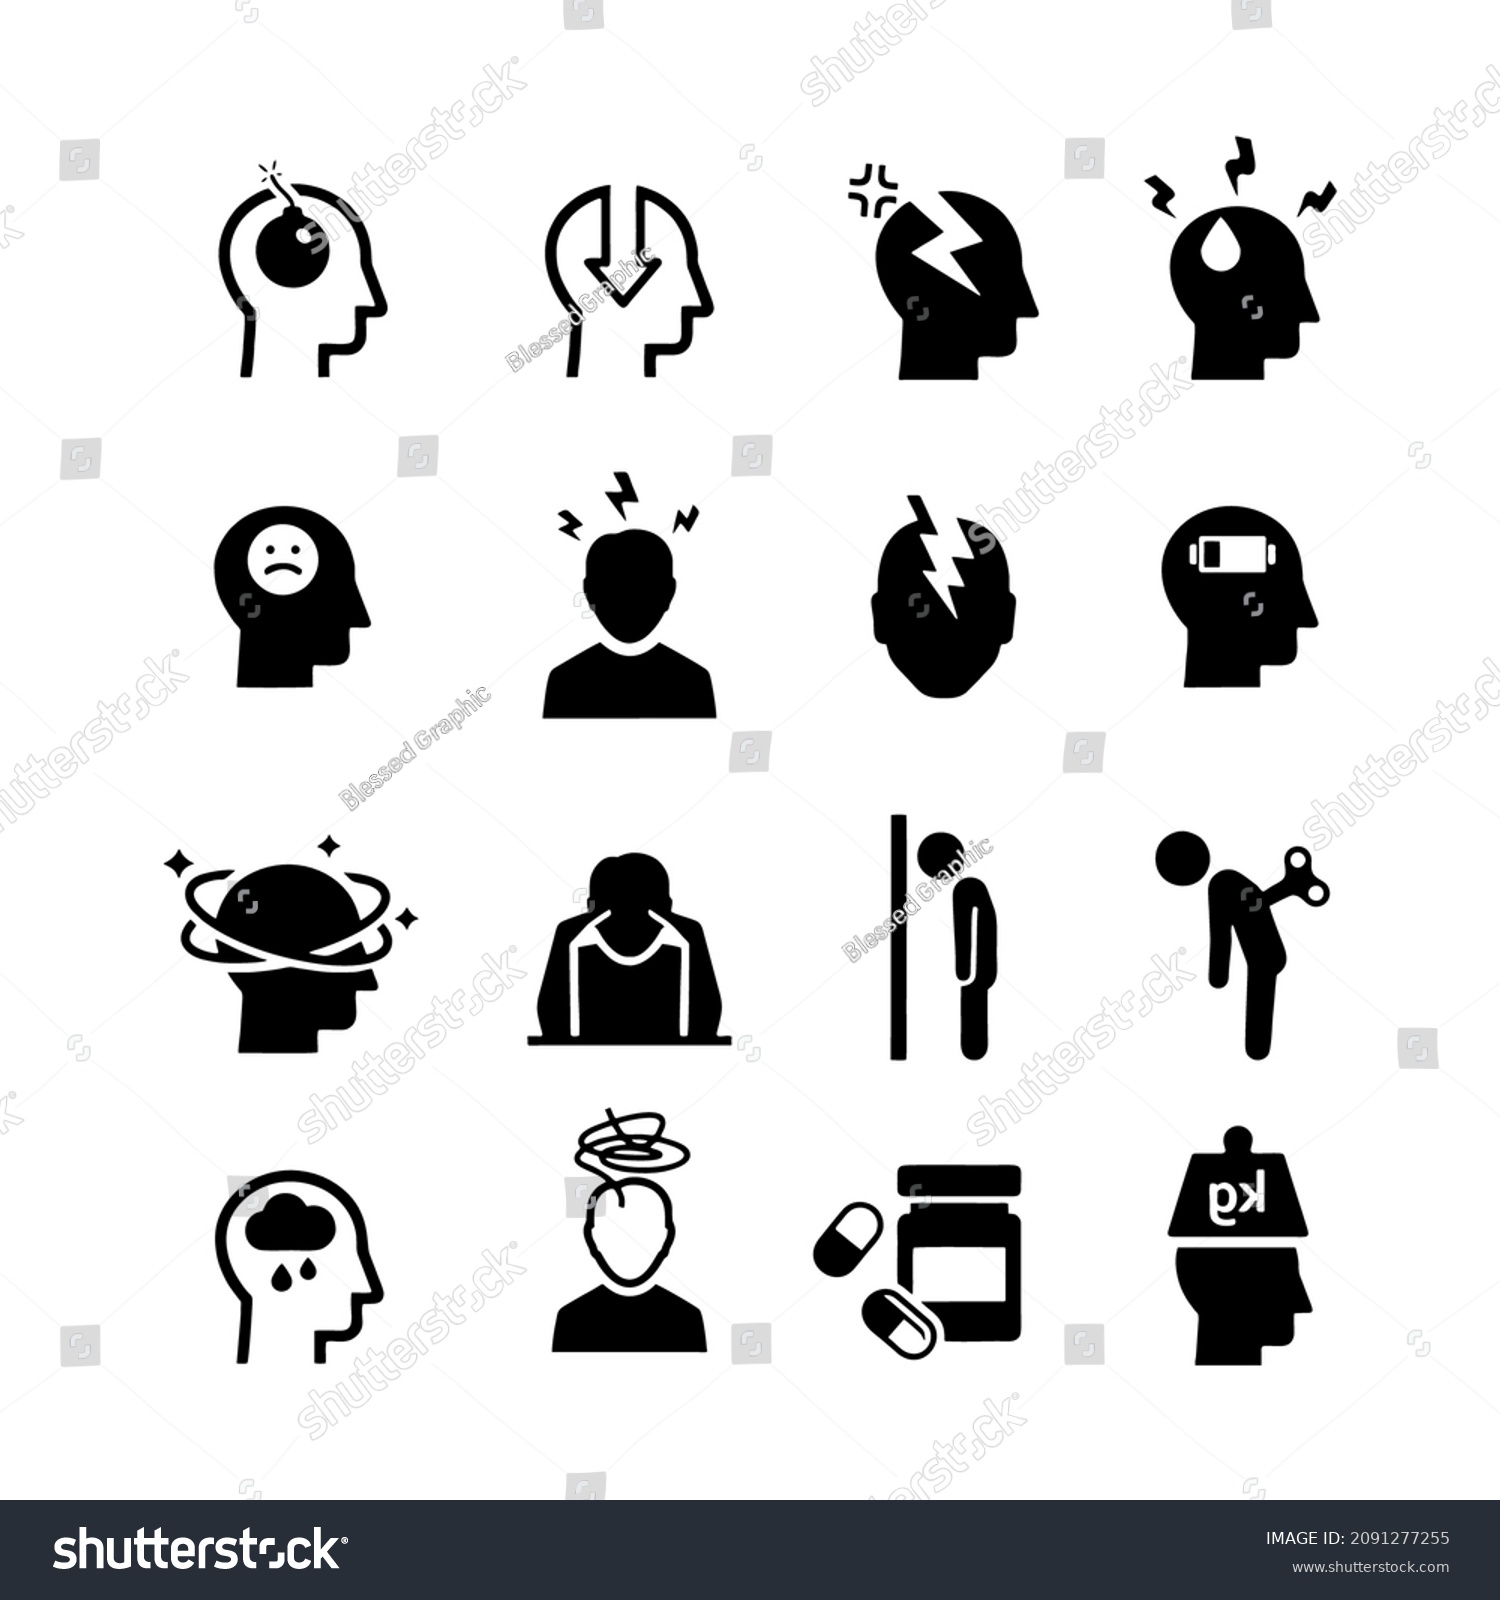 10,276 Man trouble icons Images, Stock Photos & Vectors | Shutterstock